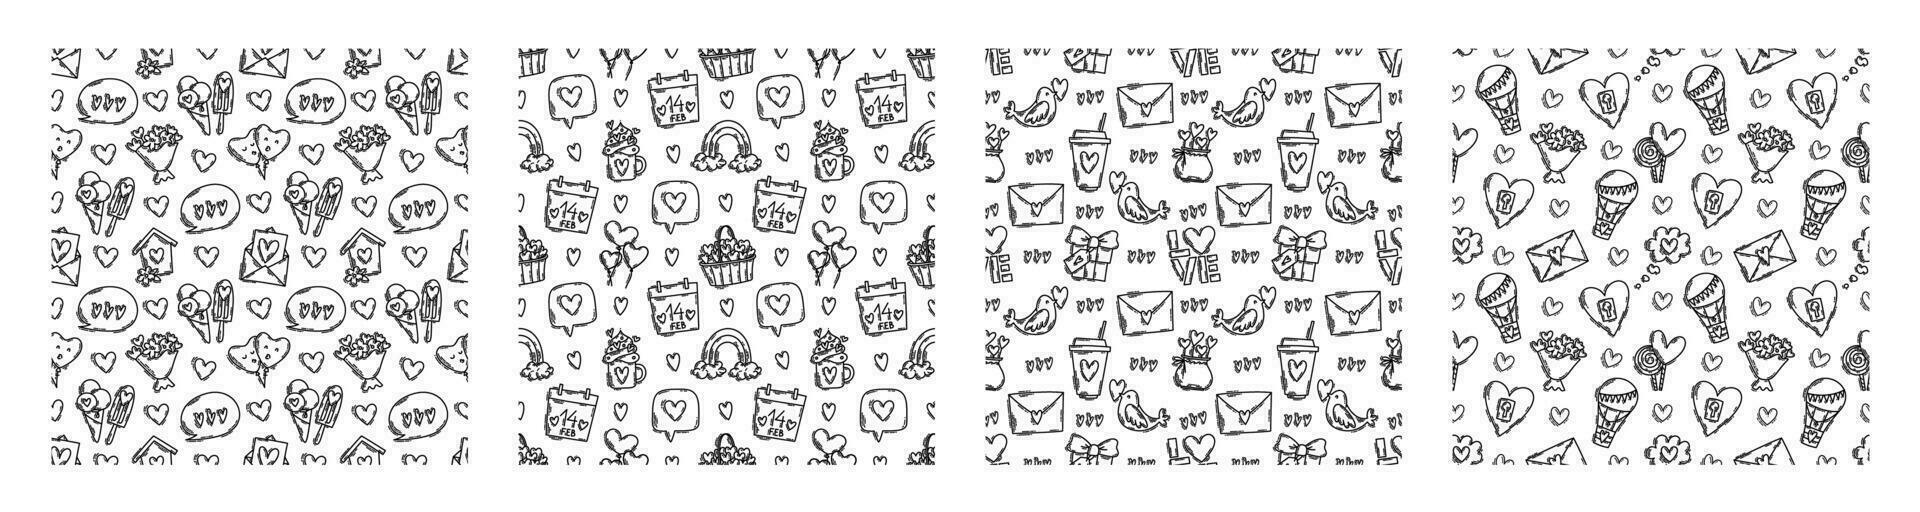 The love theme doodle style seamless pattern in black and white, Valentines Day hand-drawn icons with a simple engraving retro effect. Romantic mood, cute symbols and elements backgrounds collection. vector